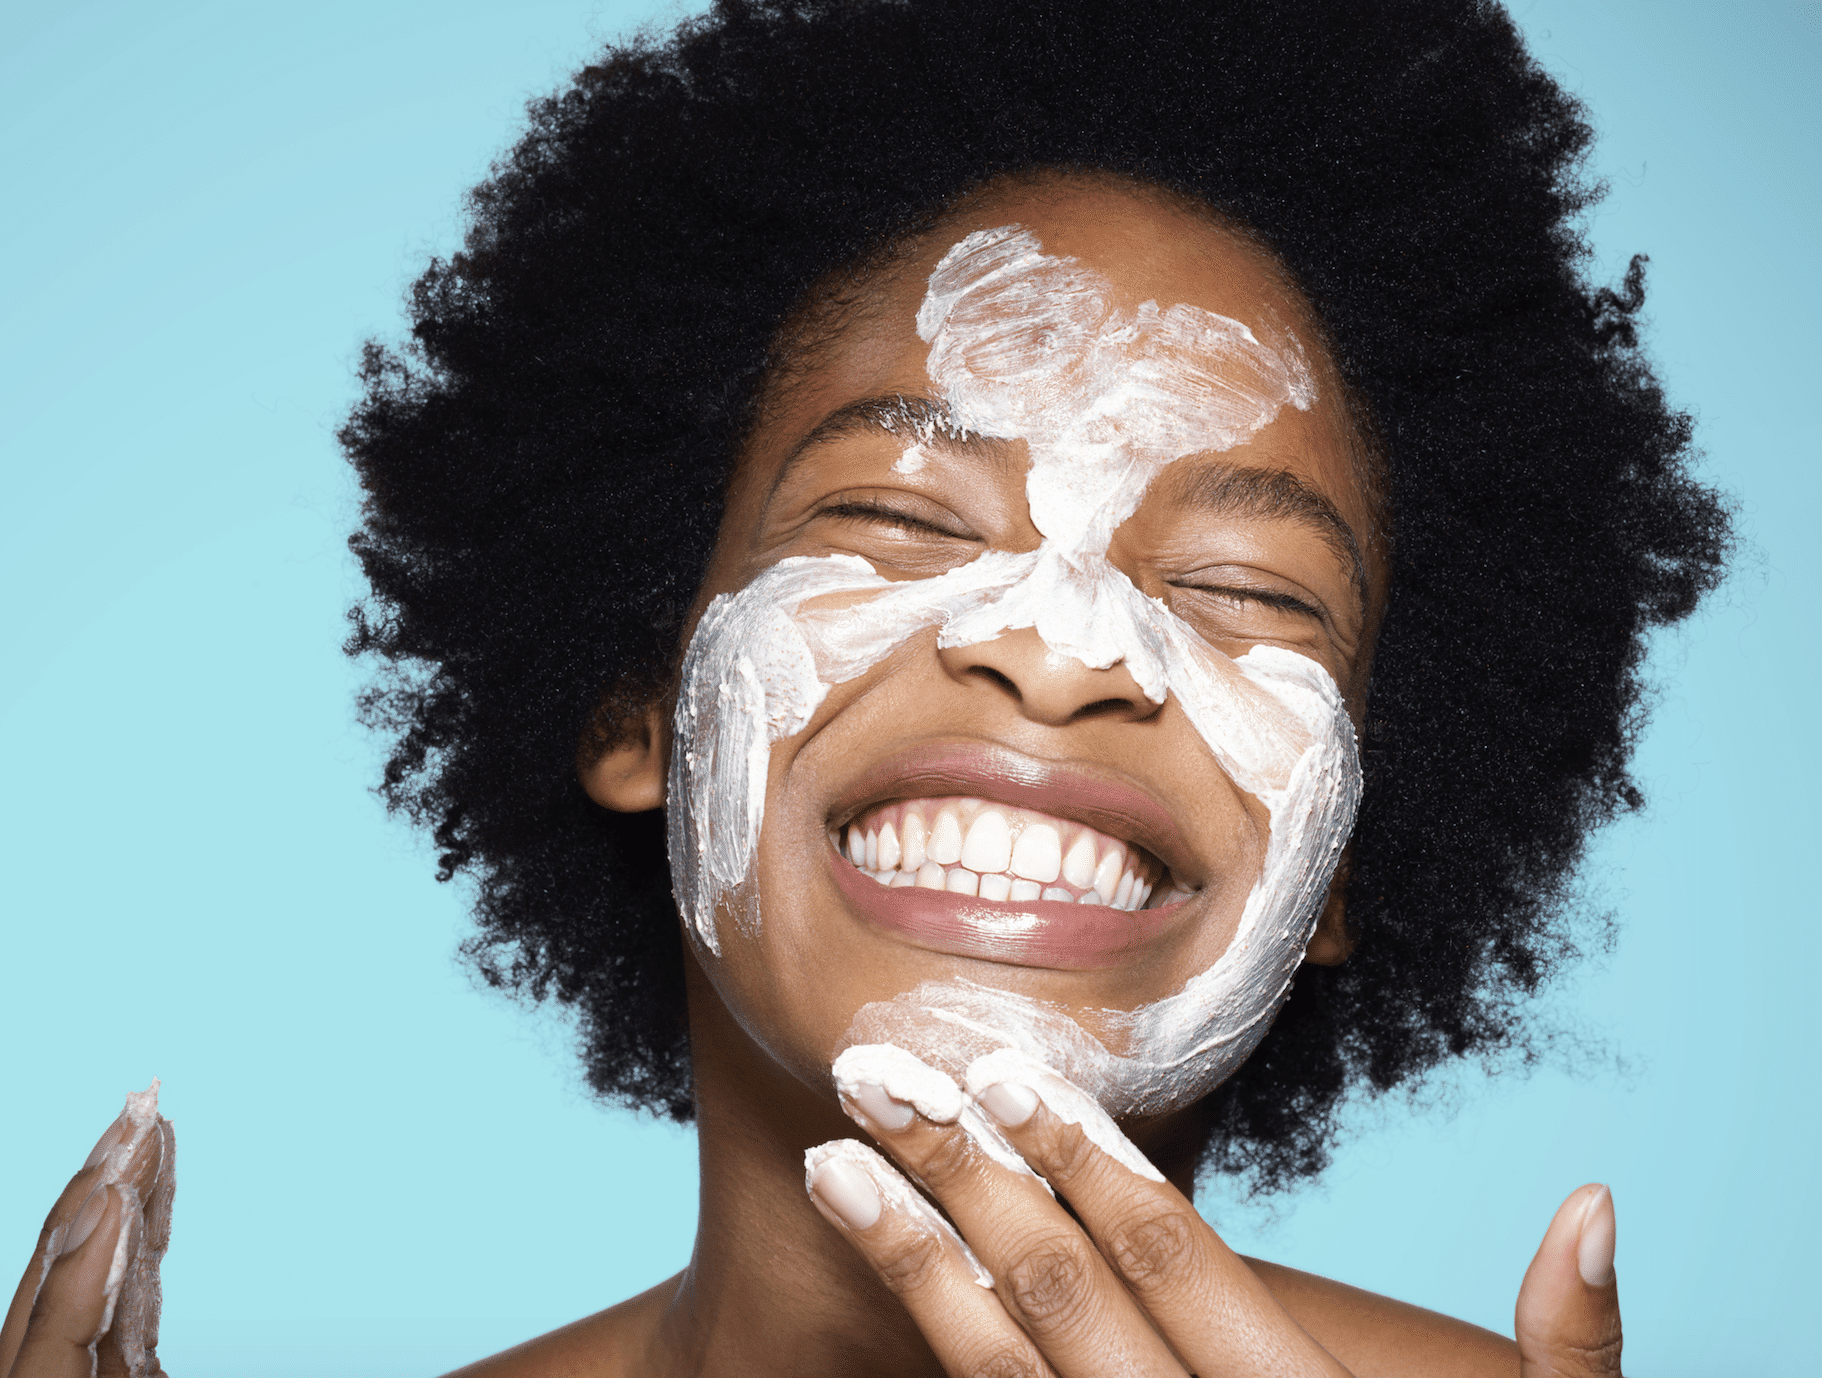 How To Remove Blemishes Overnight (Top 8 Remedies) 1